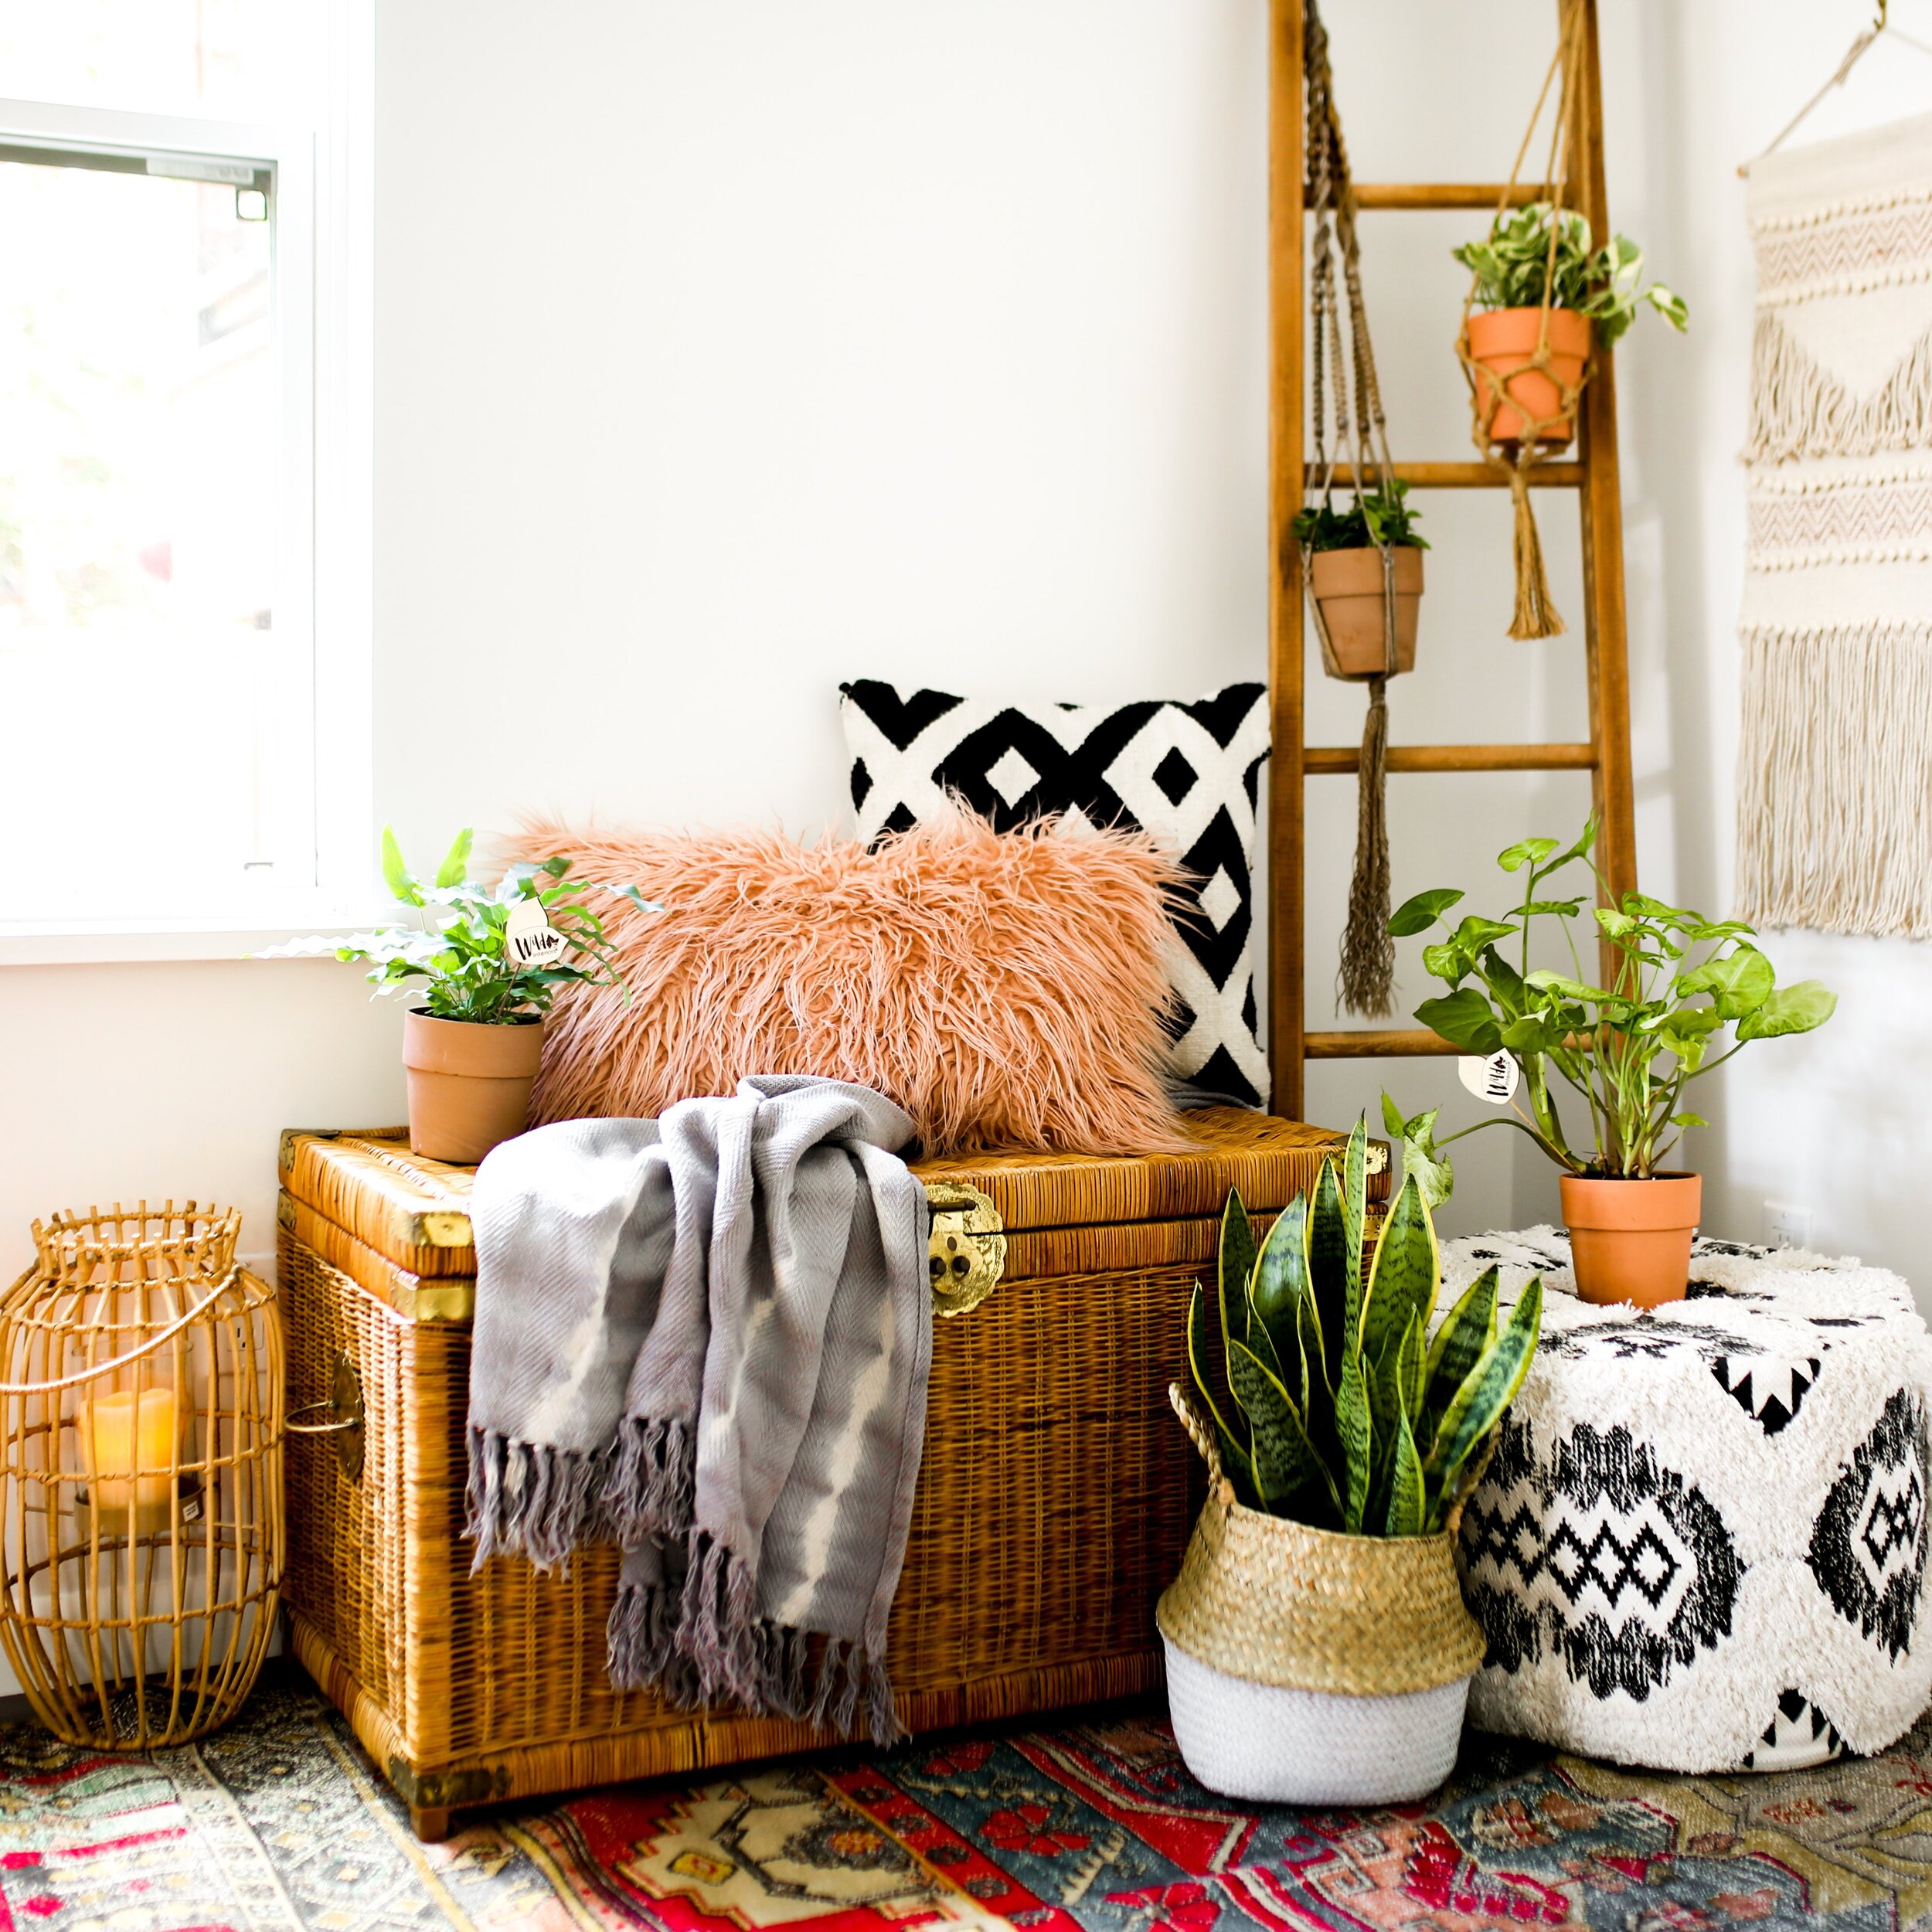 10 DIY boho decor diy projects to add bohemian flair to your home